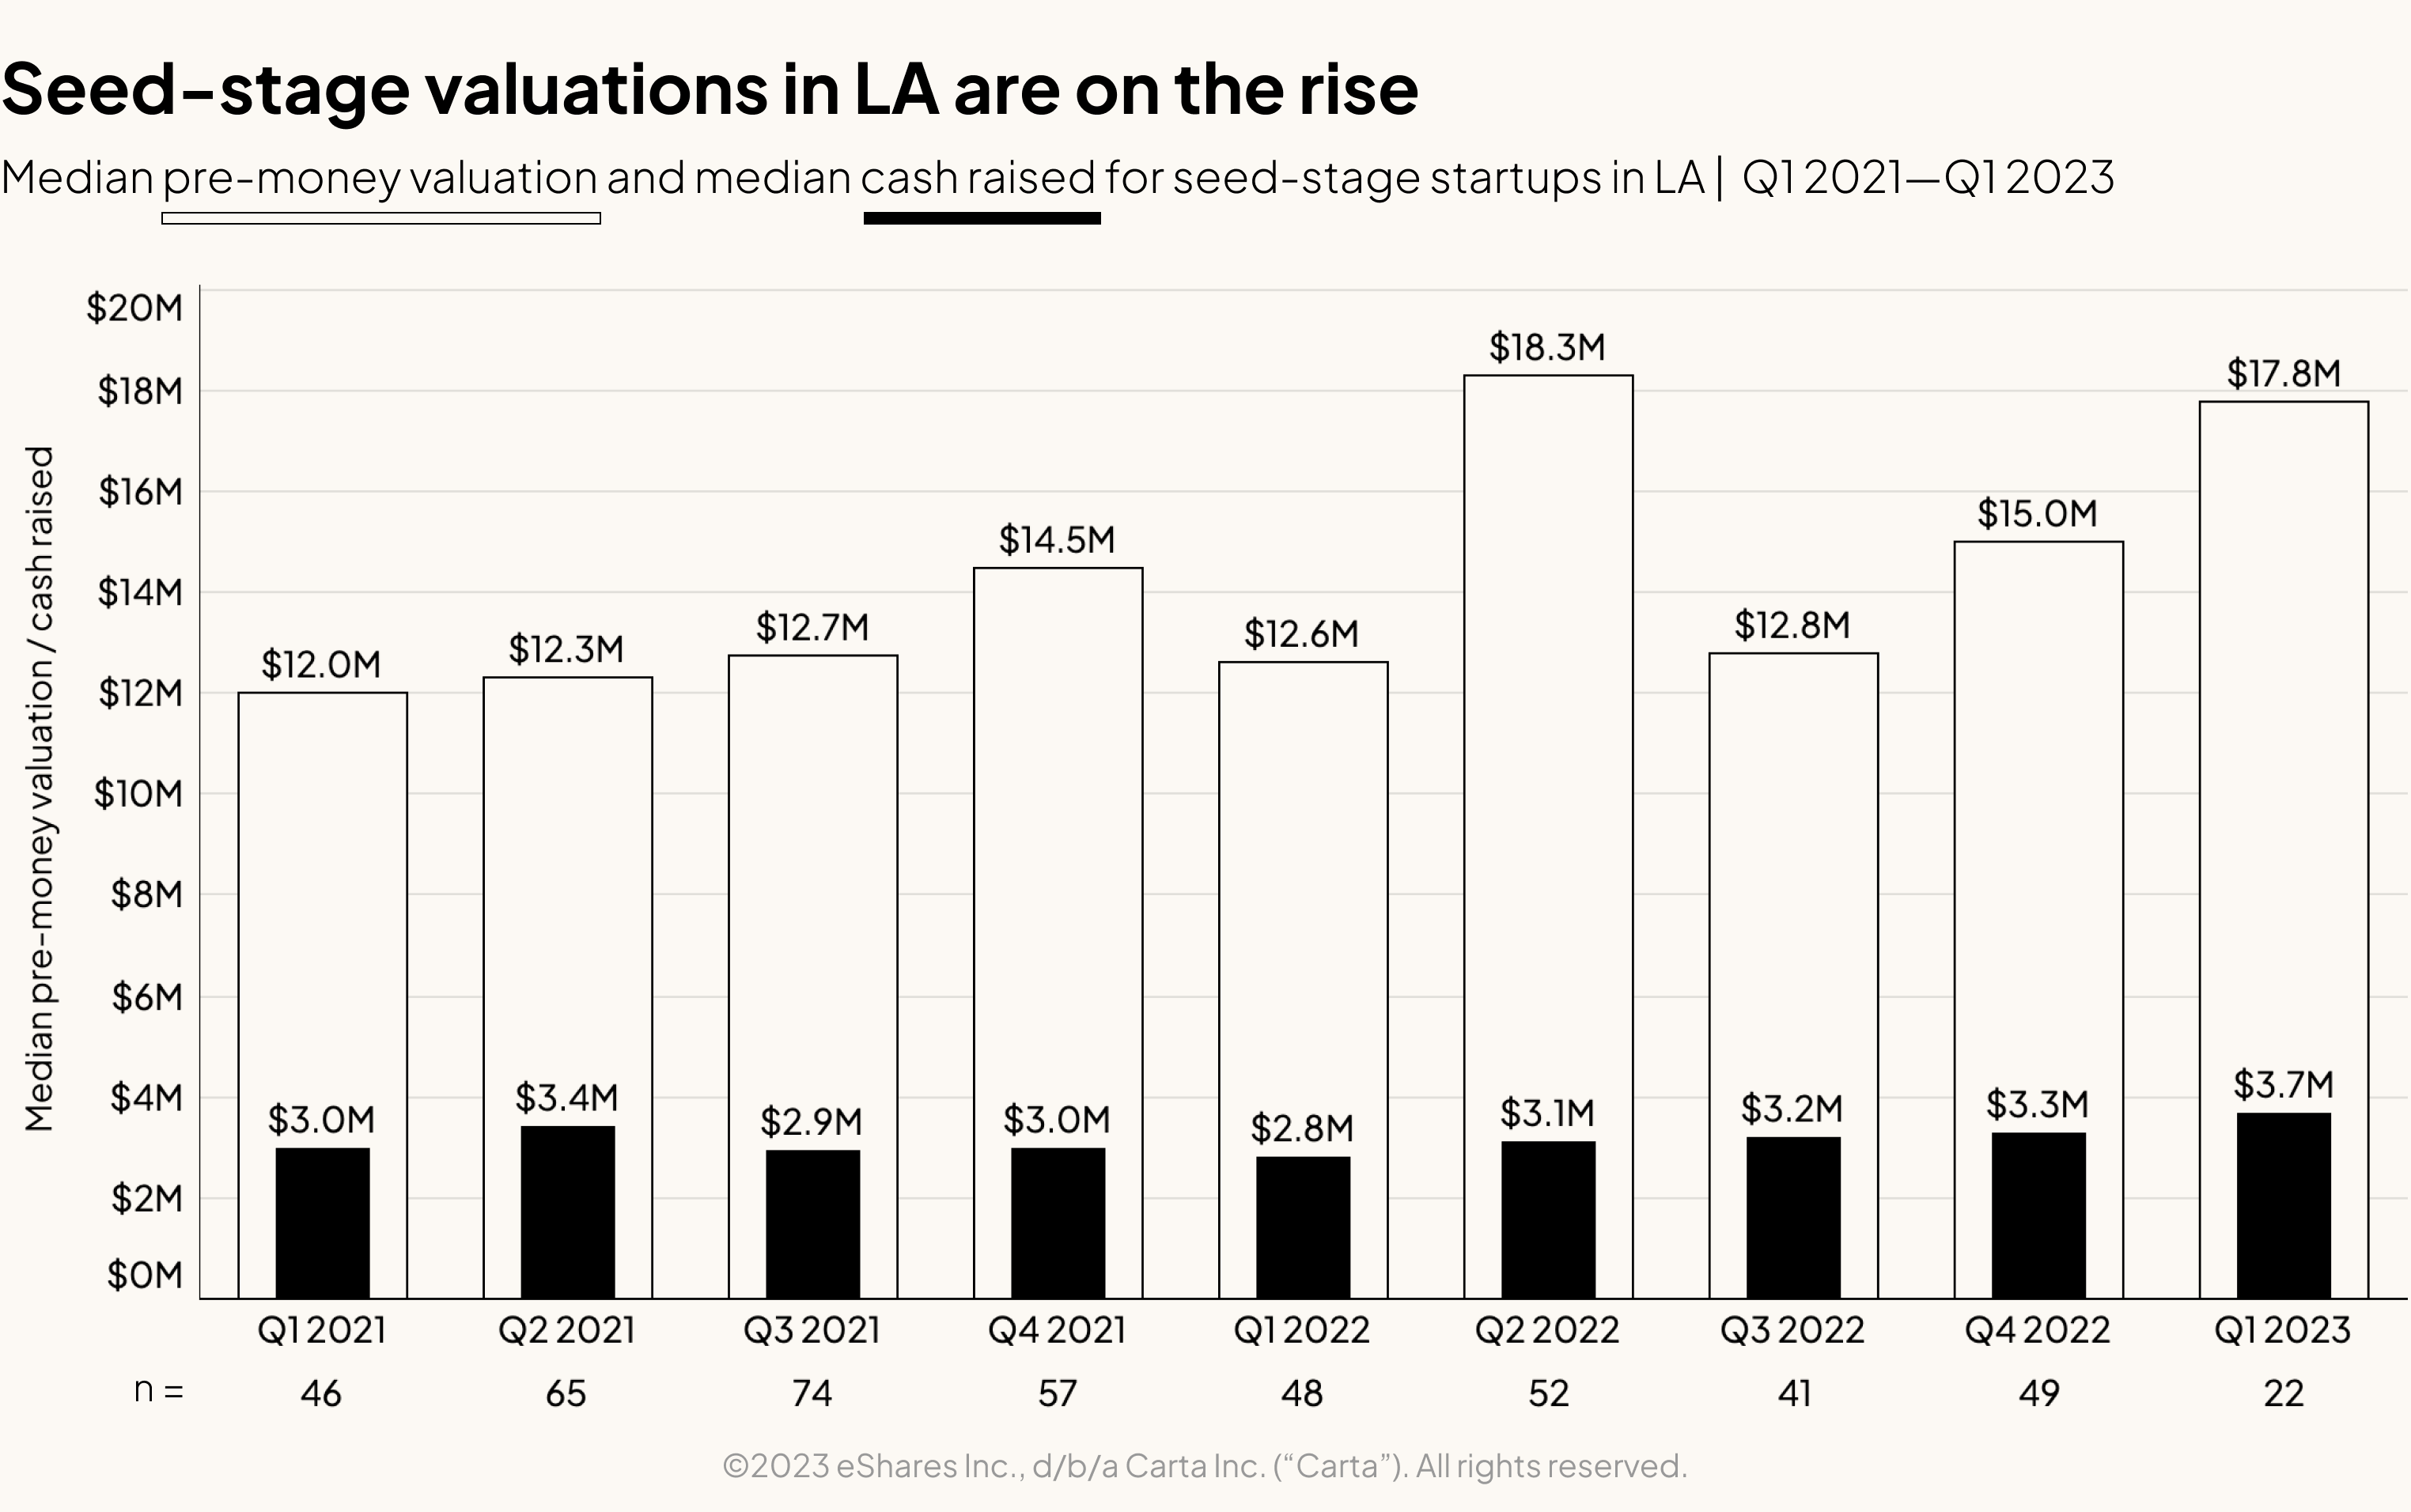 Median pre-money valuation and median cash raised for seed-stage startups in LA| Q1 2021-Q1 2023